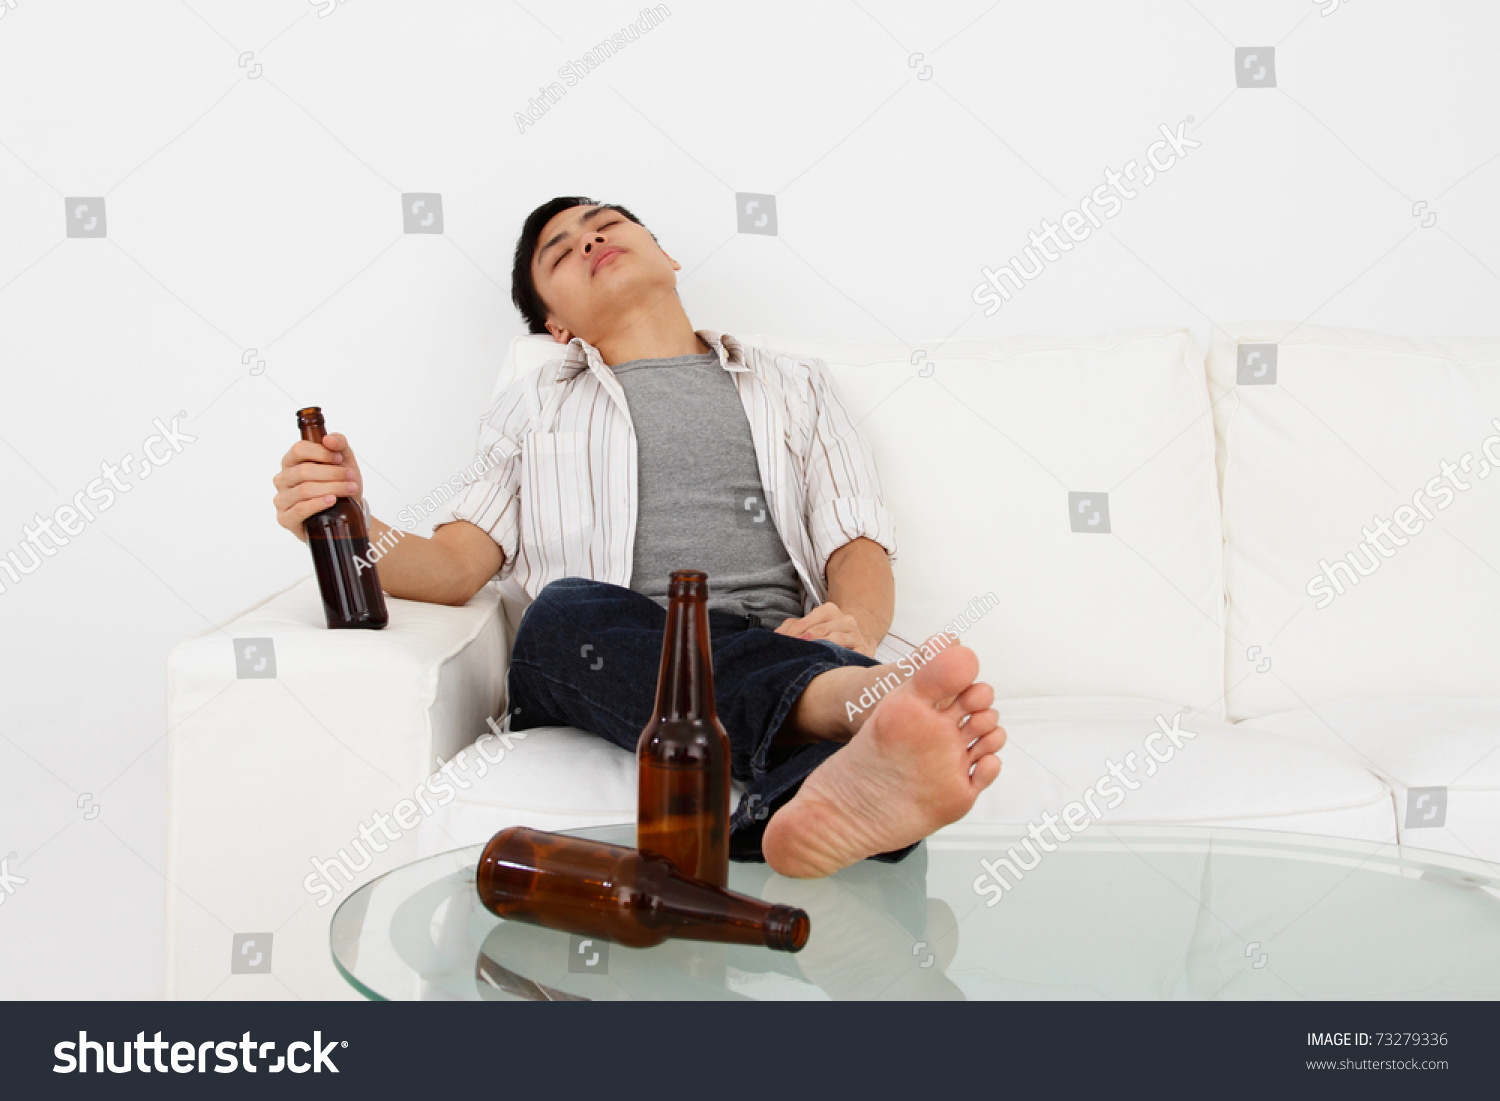 A Drunk Man On A Sofa With Beer Bottles Stock Photo 73279336 : Shutterstock